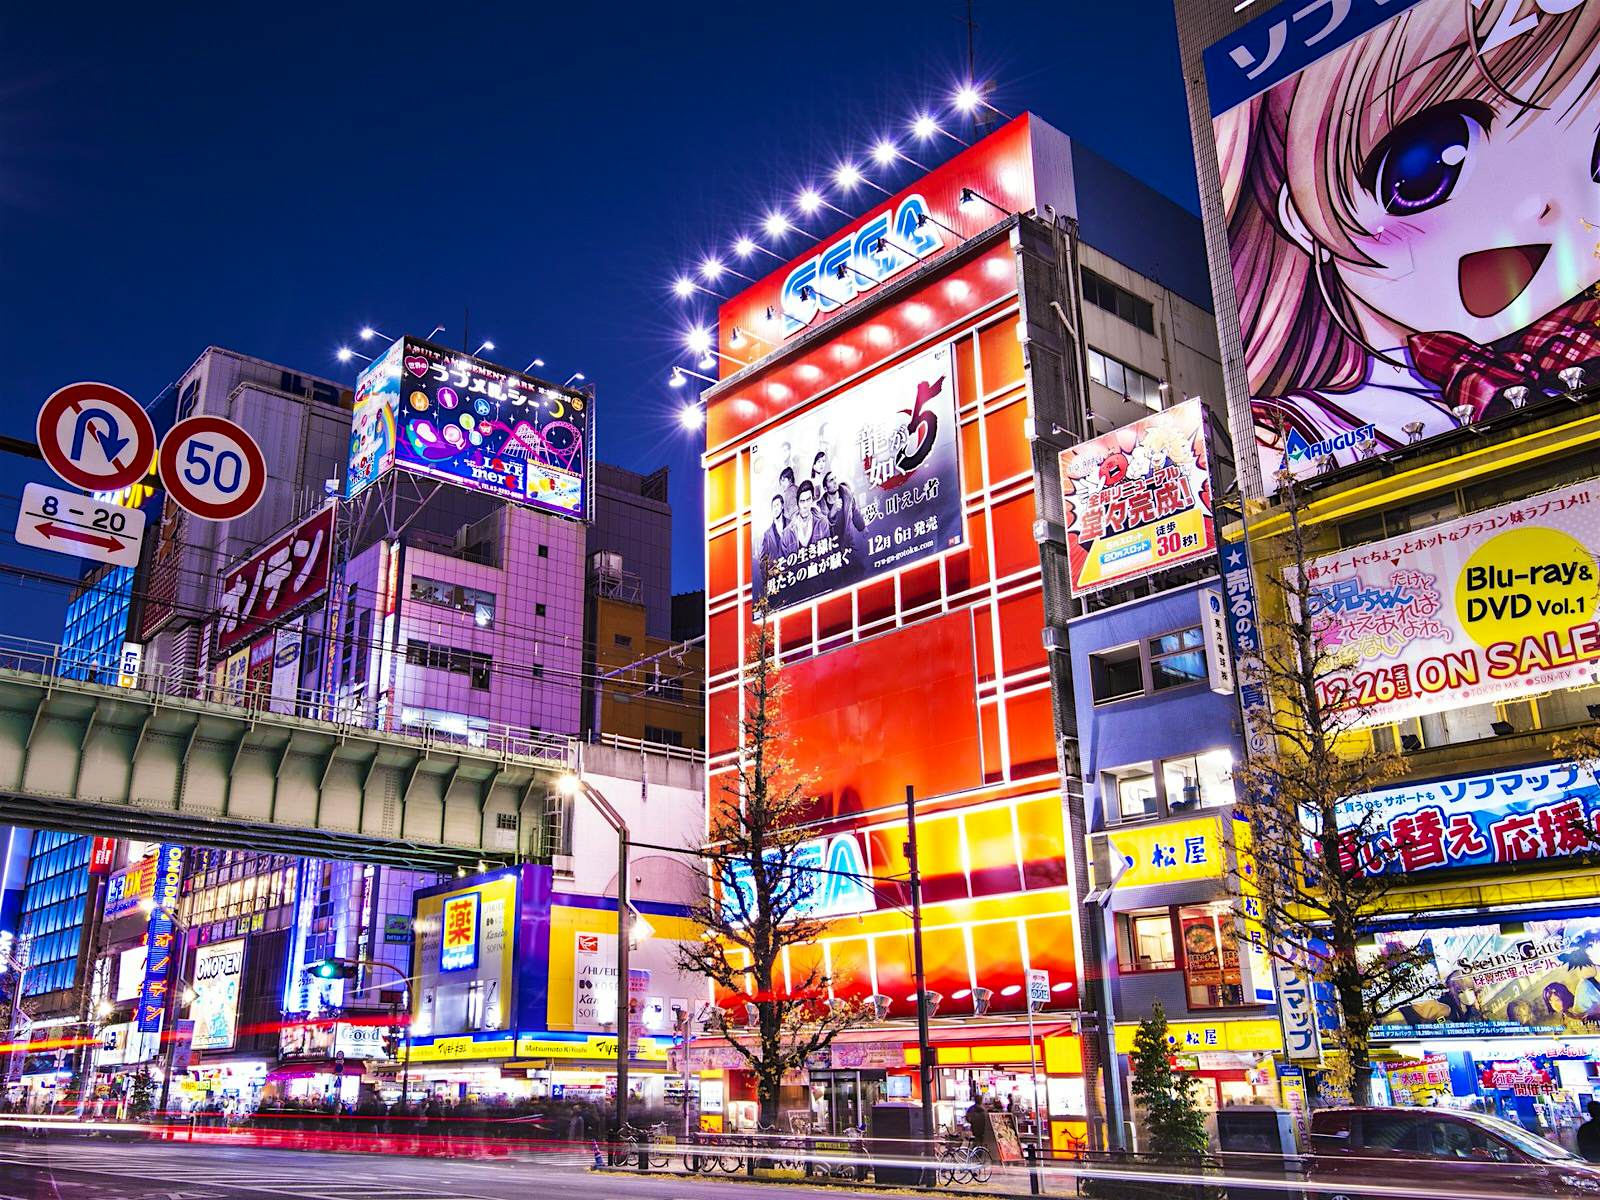 Tokyo S Akihabara District From Electronics To Maid Cafes